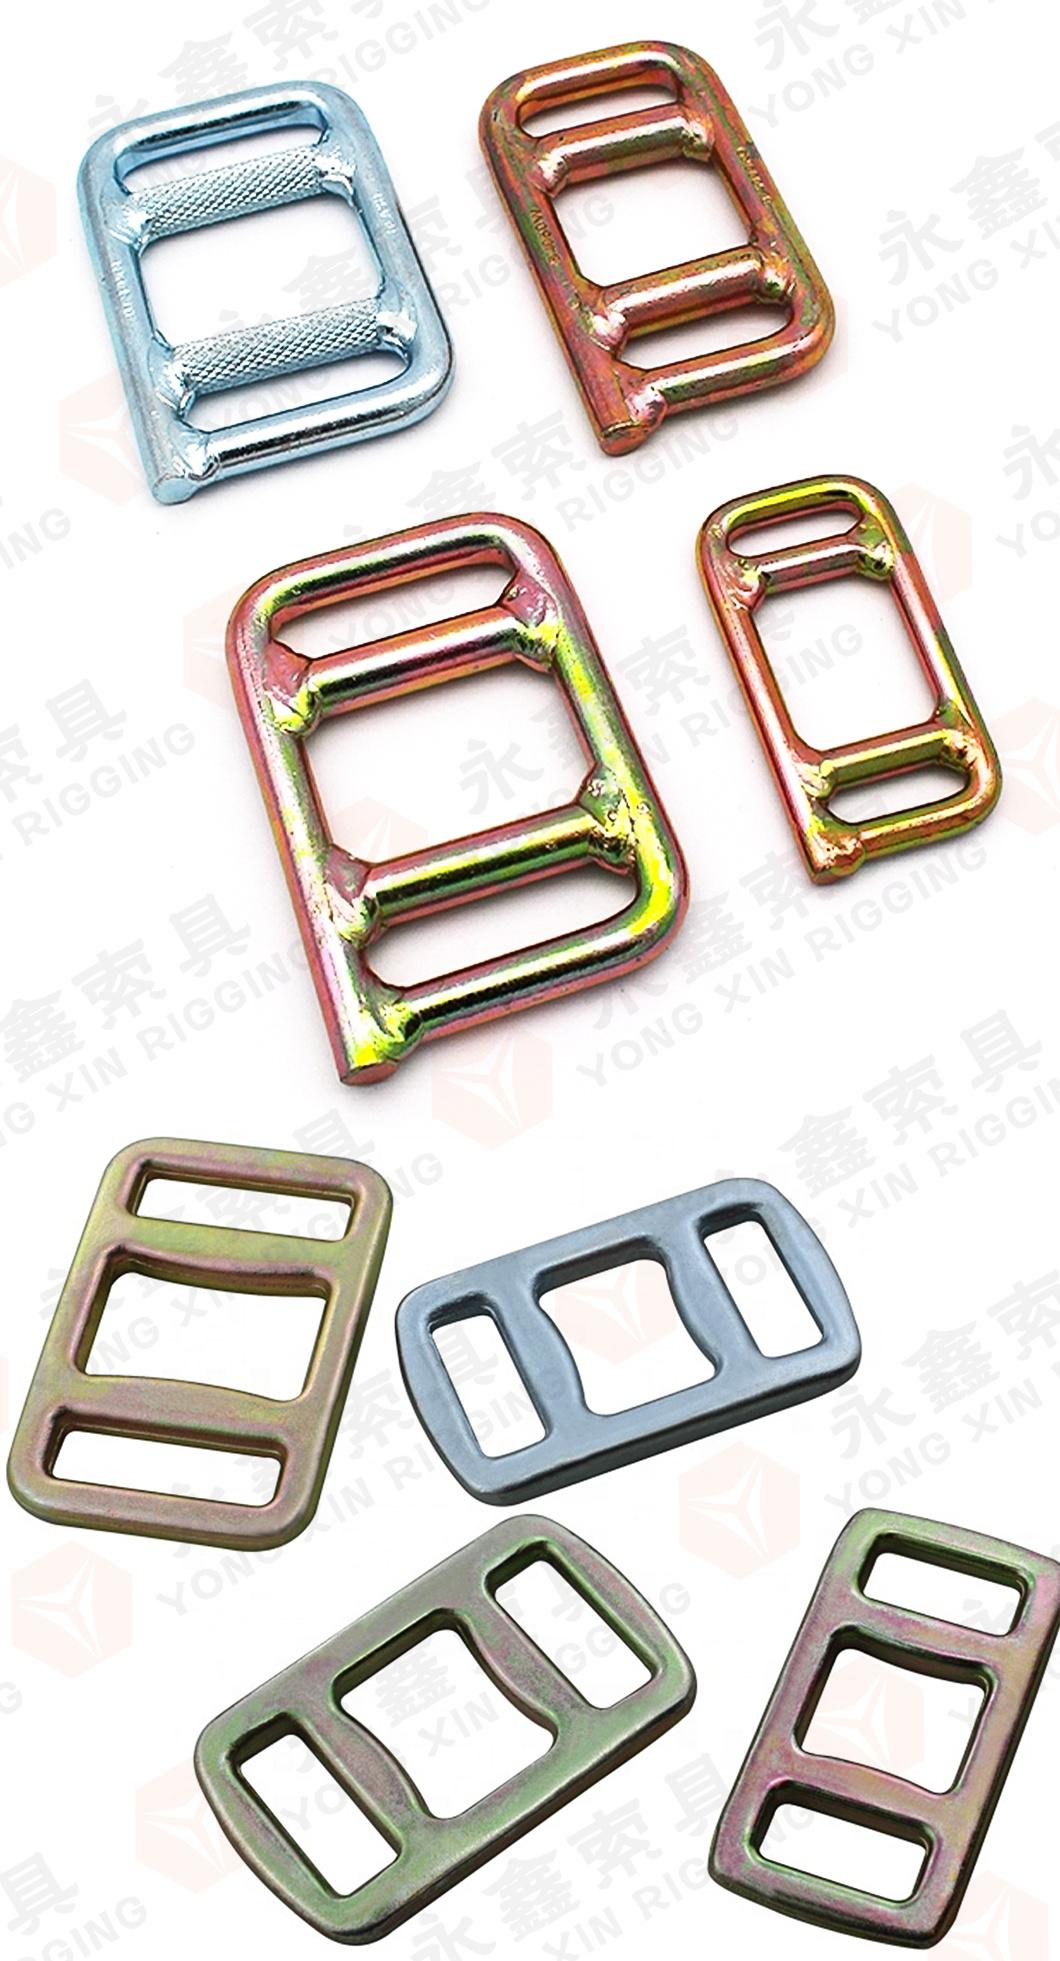 Best Seller Factory Metal One Way Lashing Buckle for Packing Goods